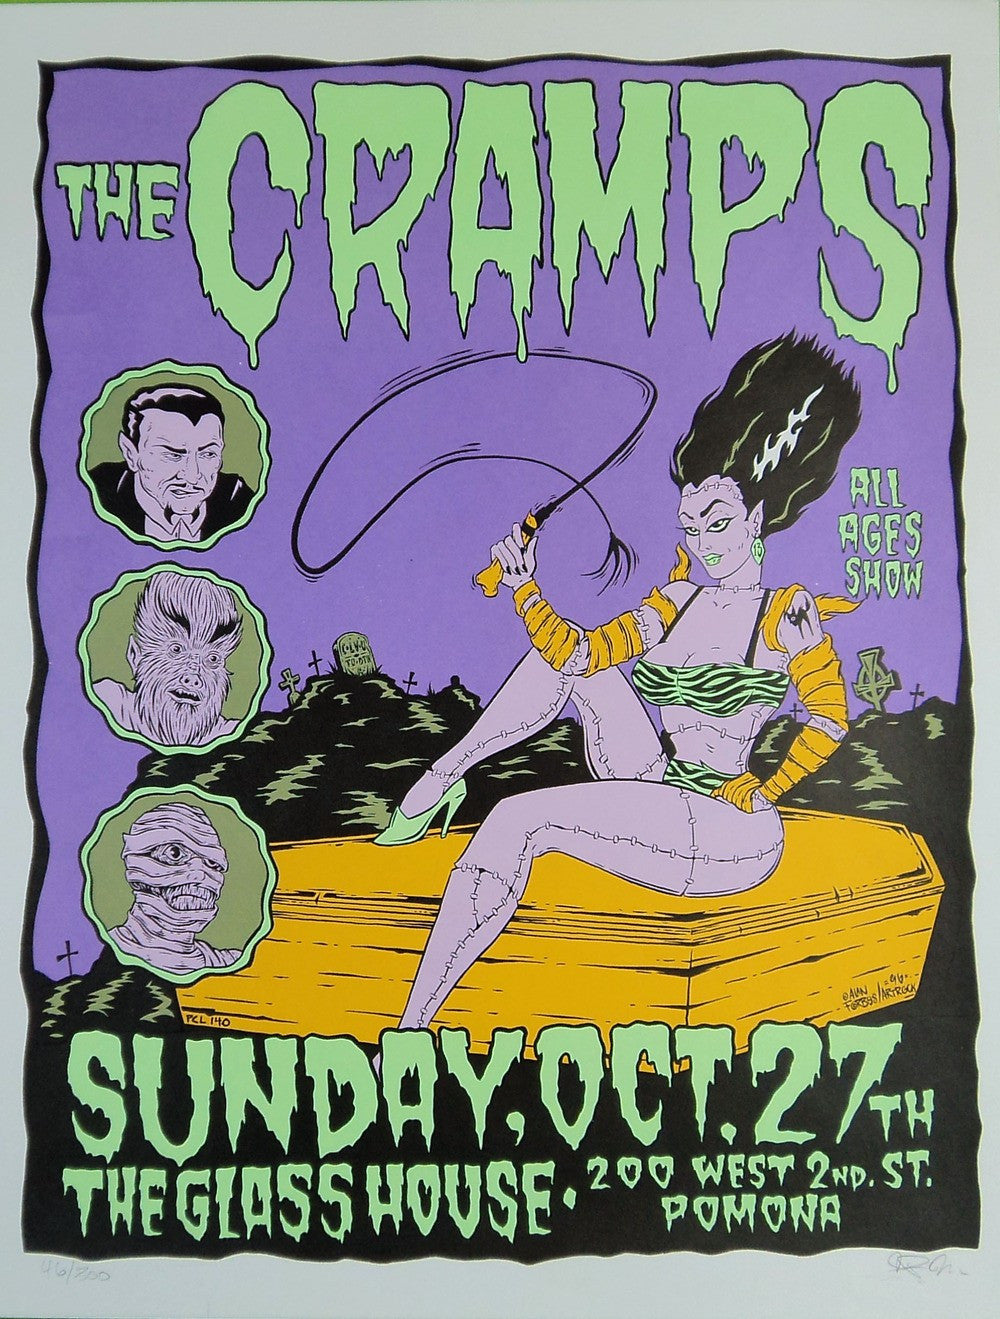 Alan Forbes - 1996 - The Cramps Concert Poster